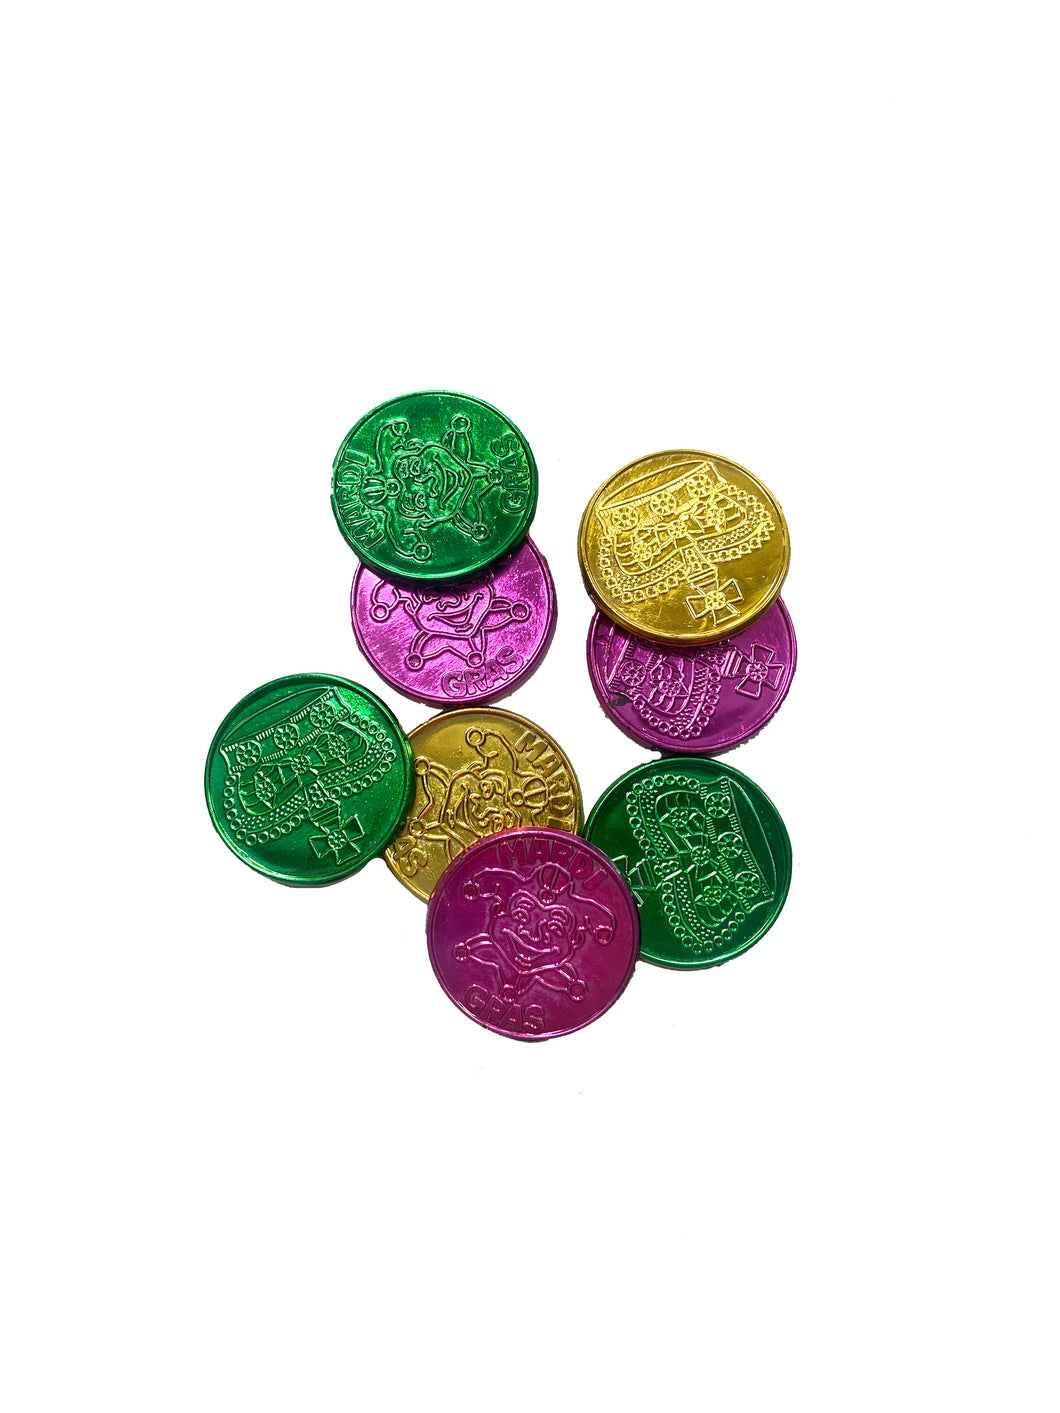 Purple, Green, and Gold Doubloons